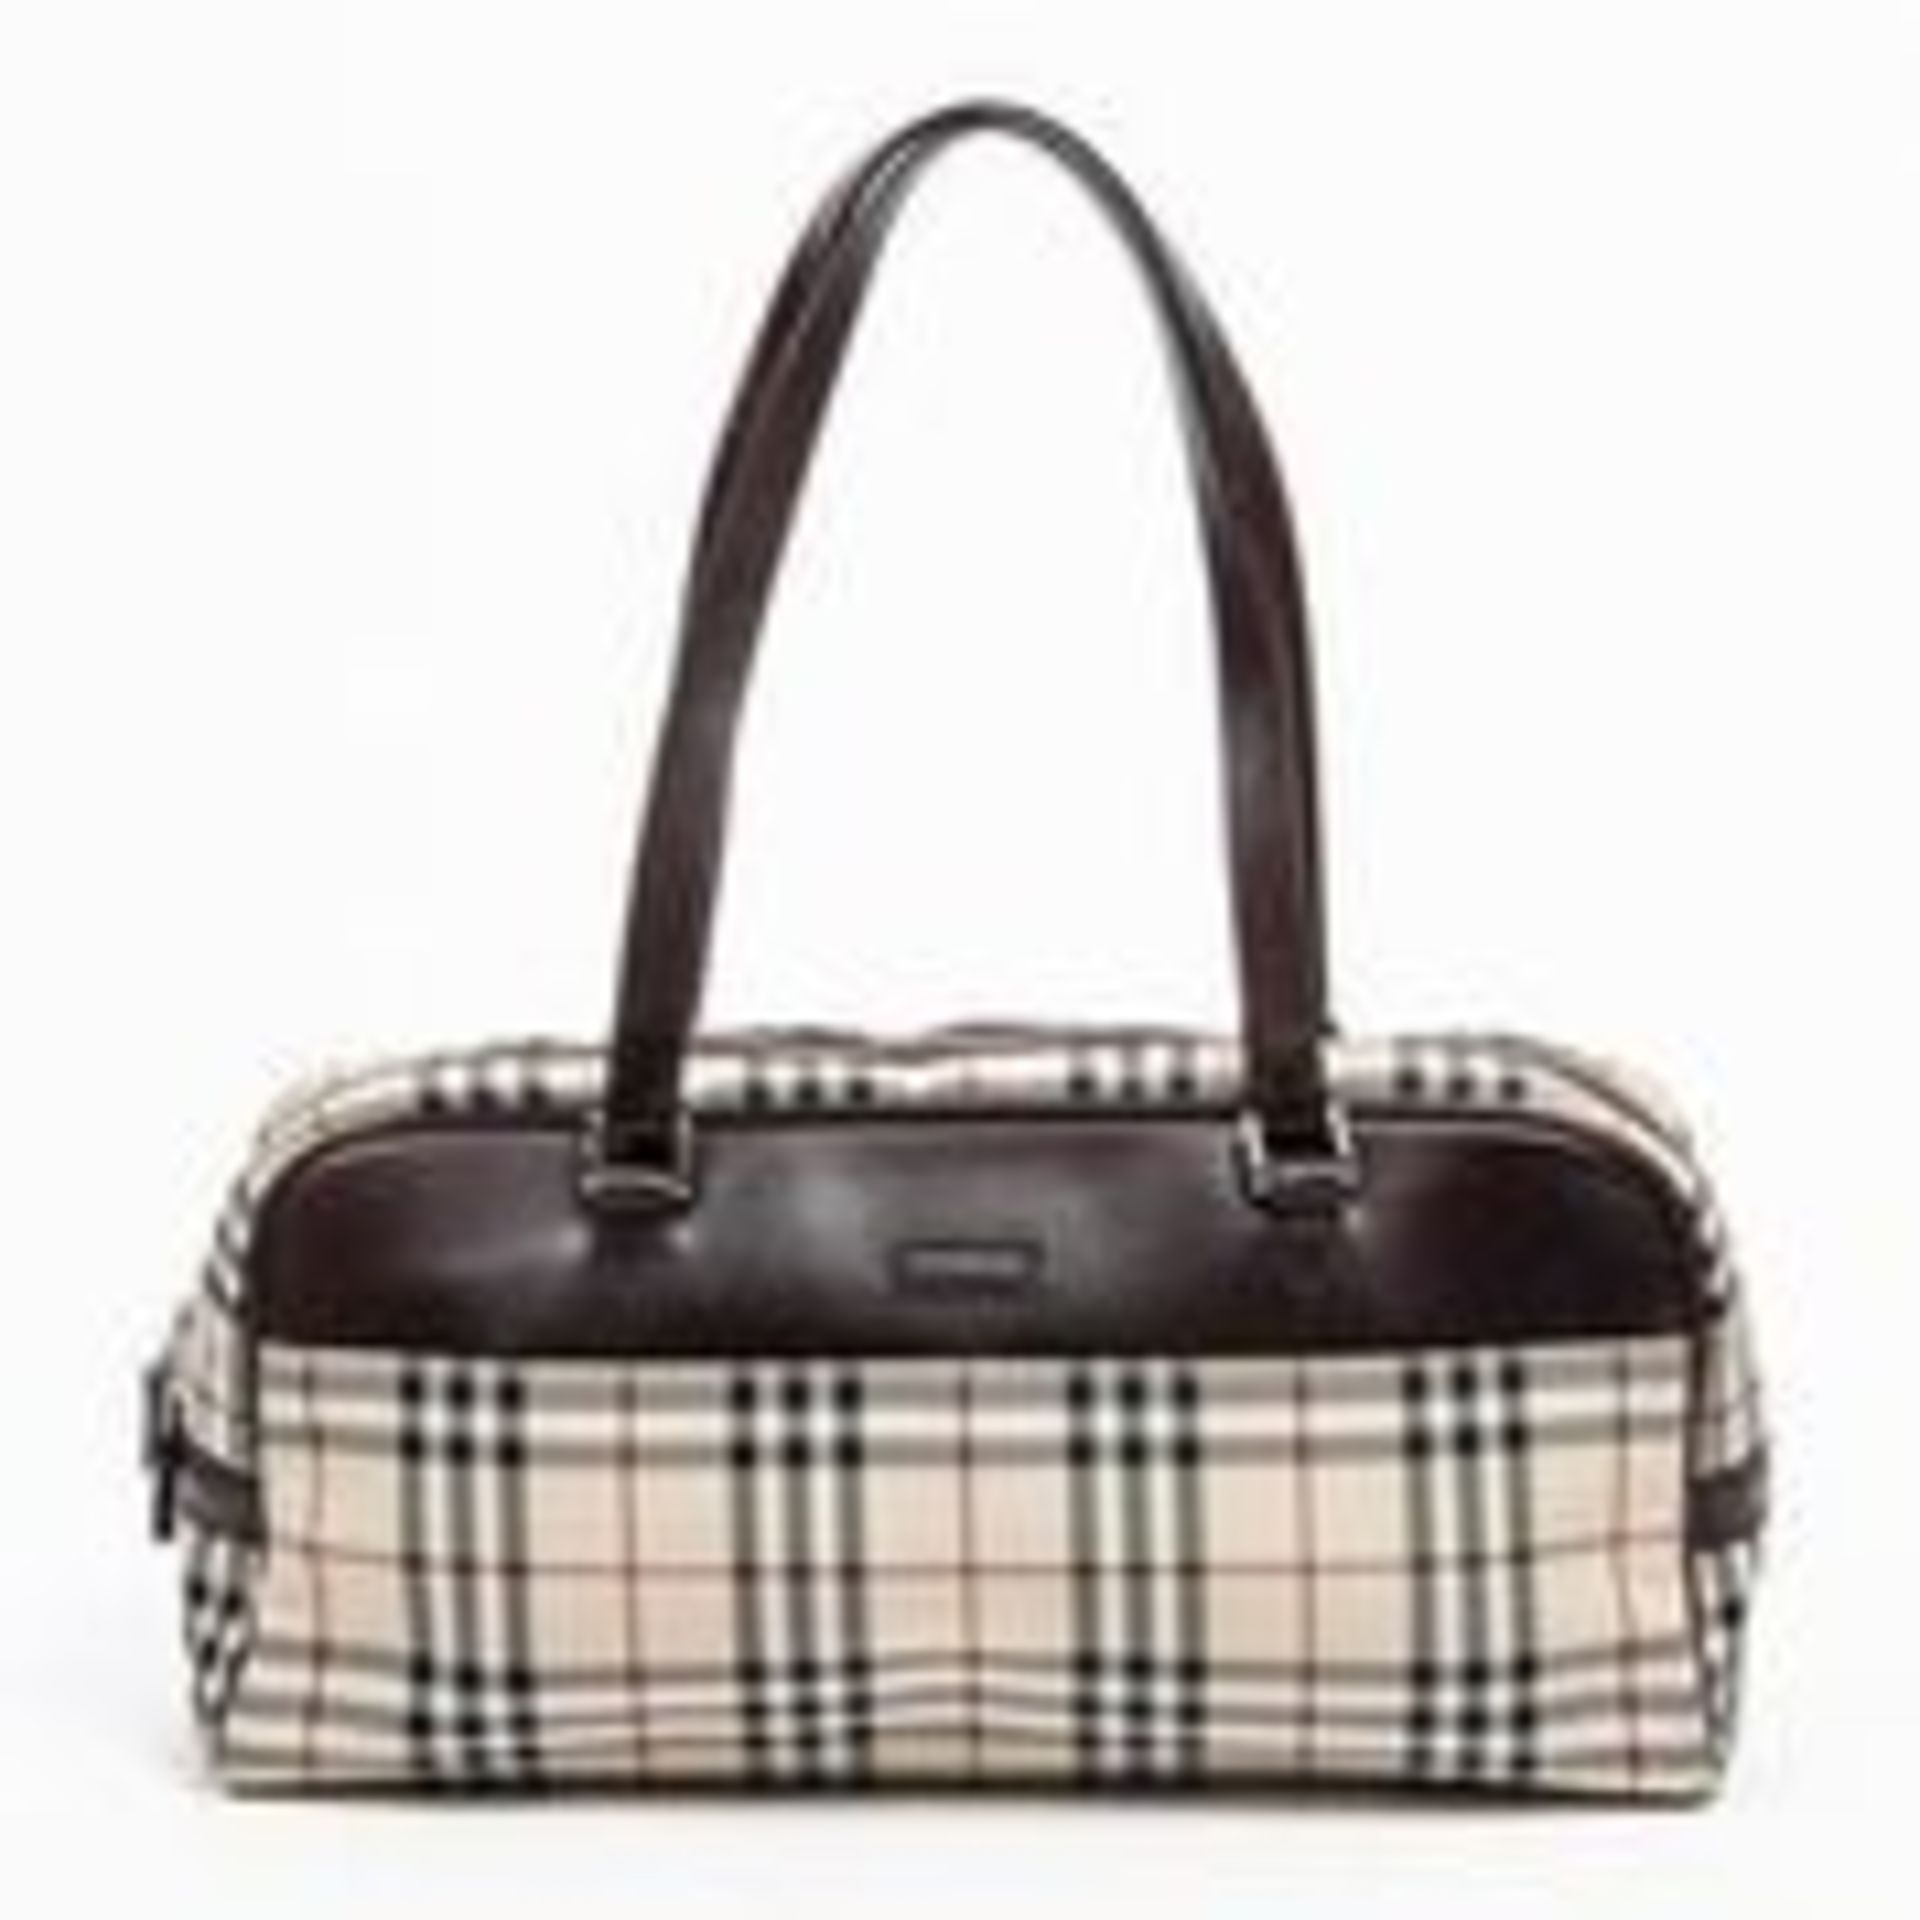 RRP £875 Burberry Shoulder Bag Beige/Dark Brown - AAQ0407 - Grade AB - Please Contact Us Directly